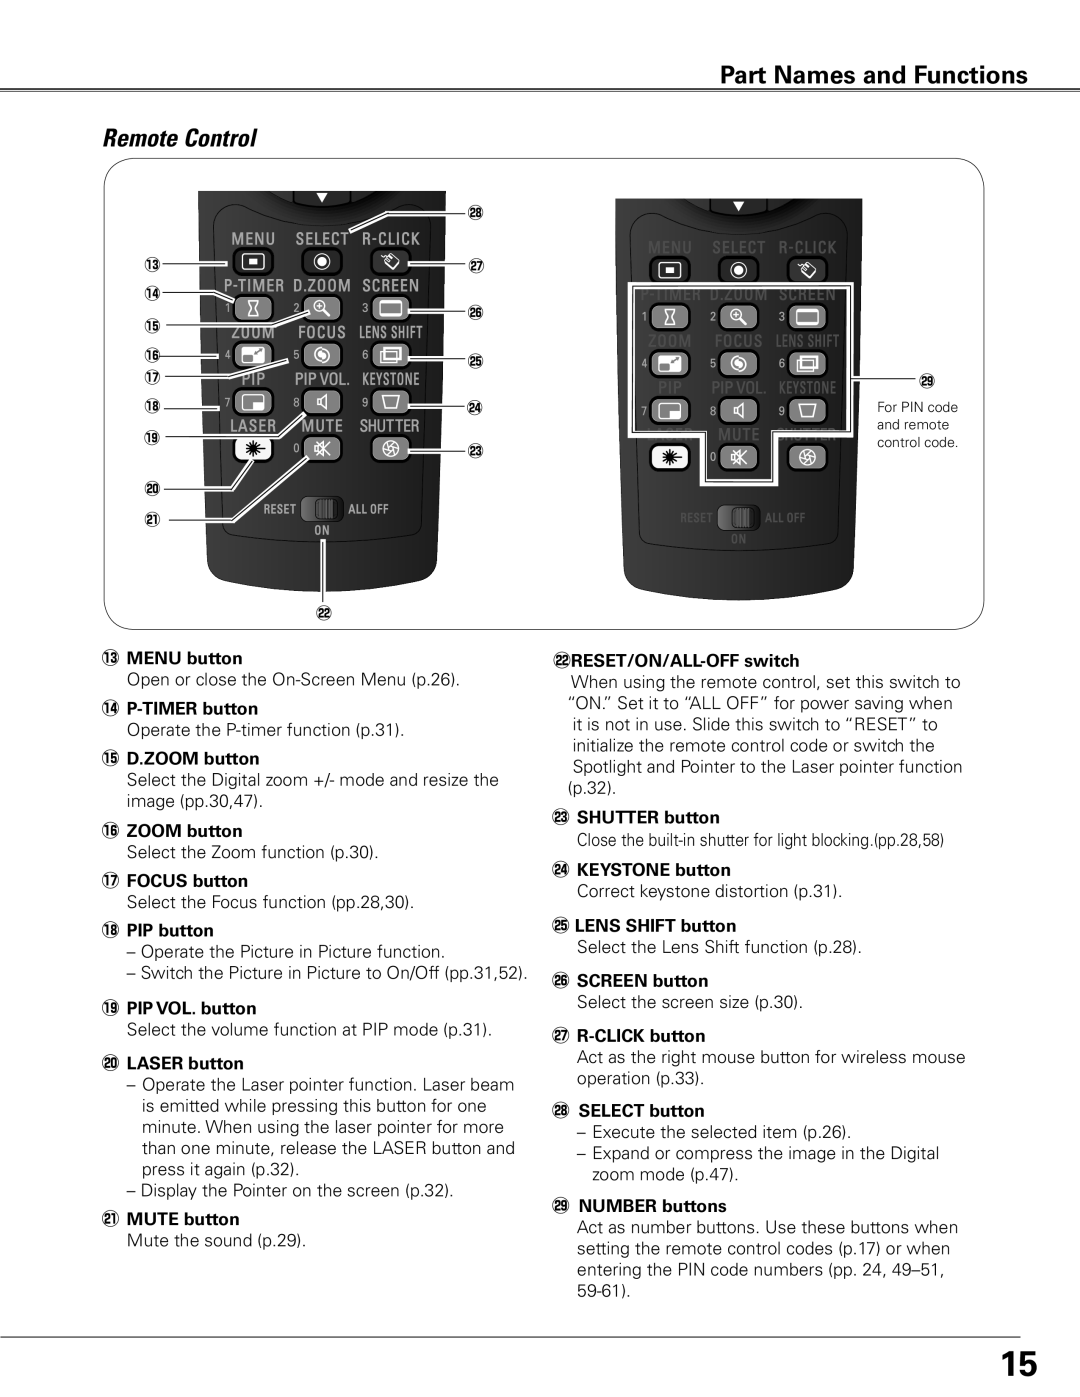 Sanyo WTC500L owner manual Part Names and Functions, Remote Control, 3MENU button 